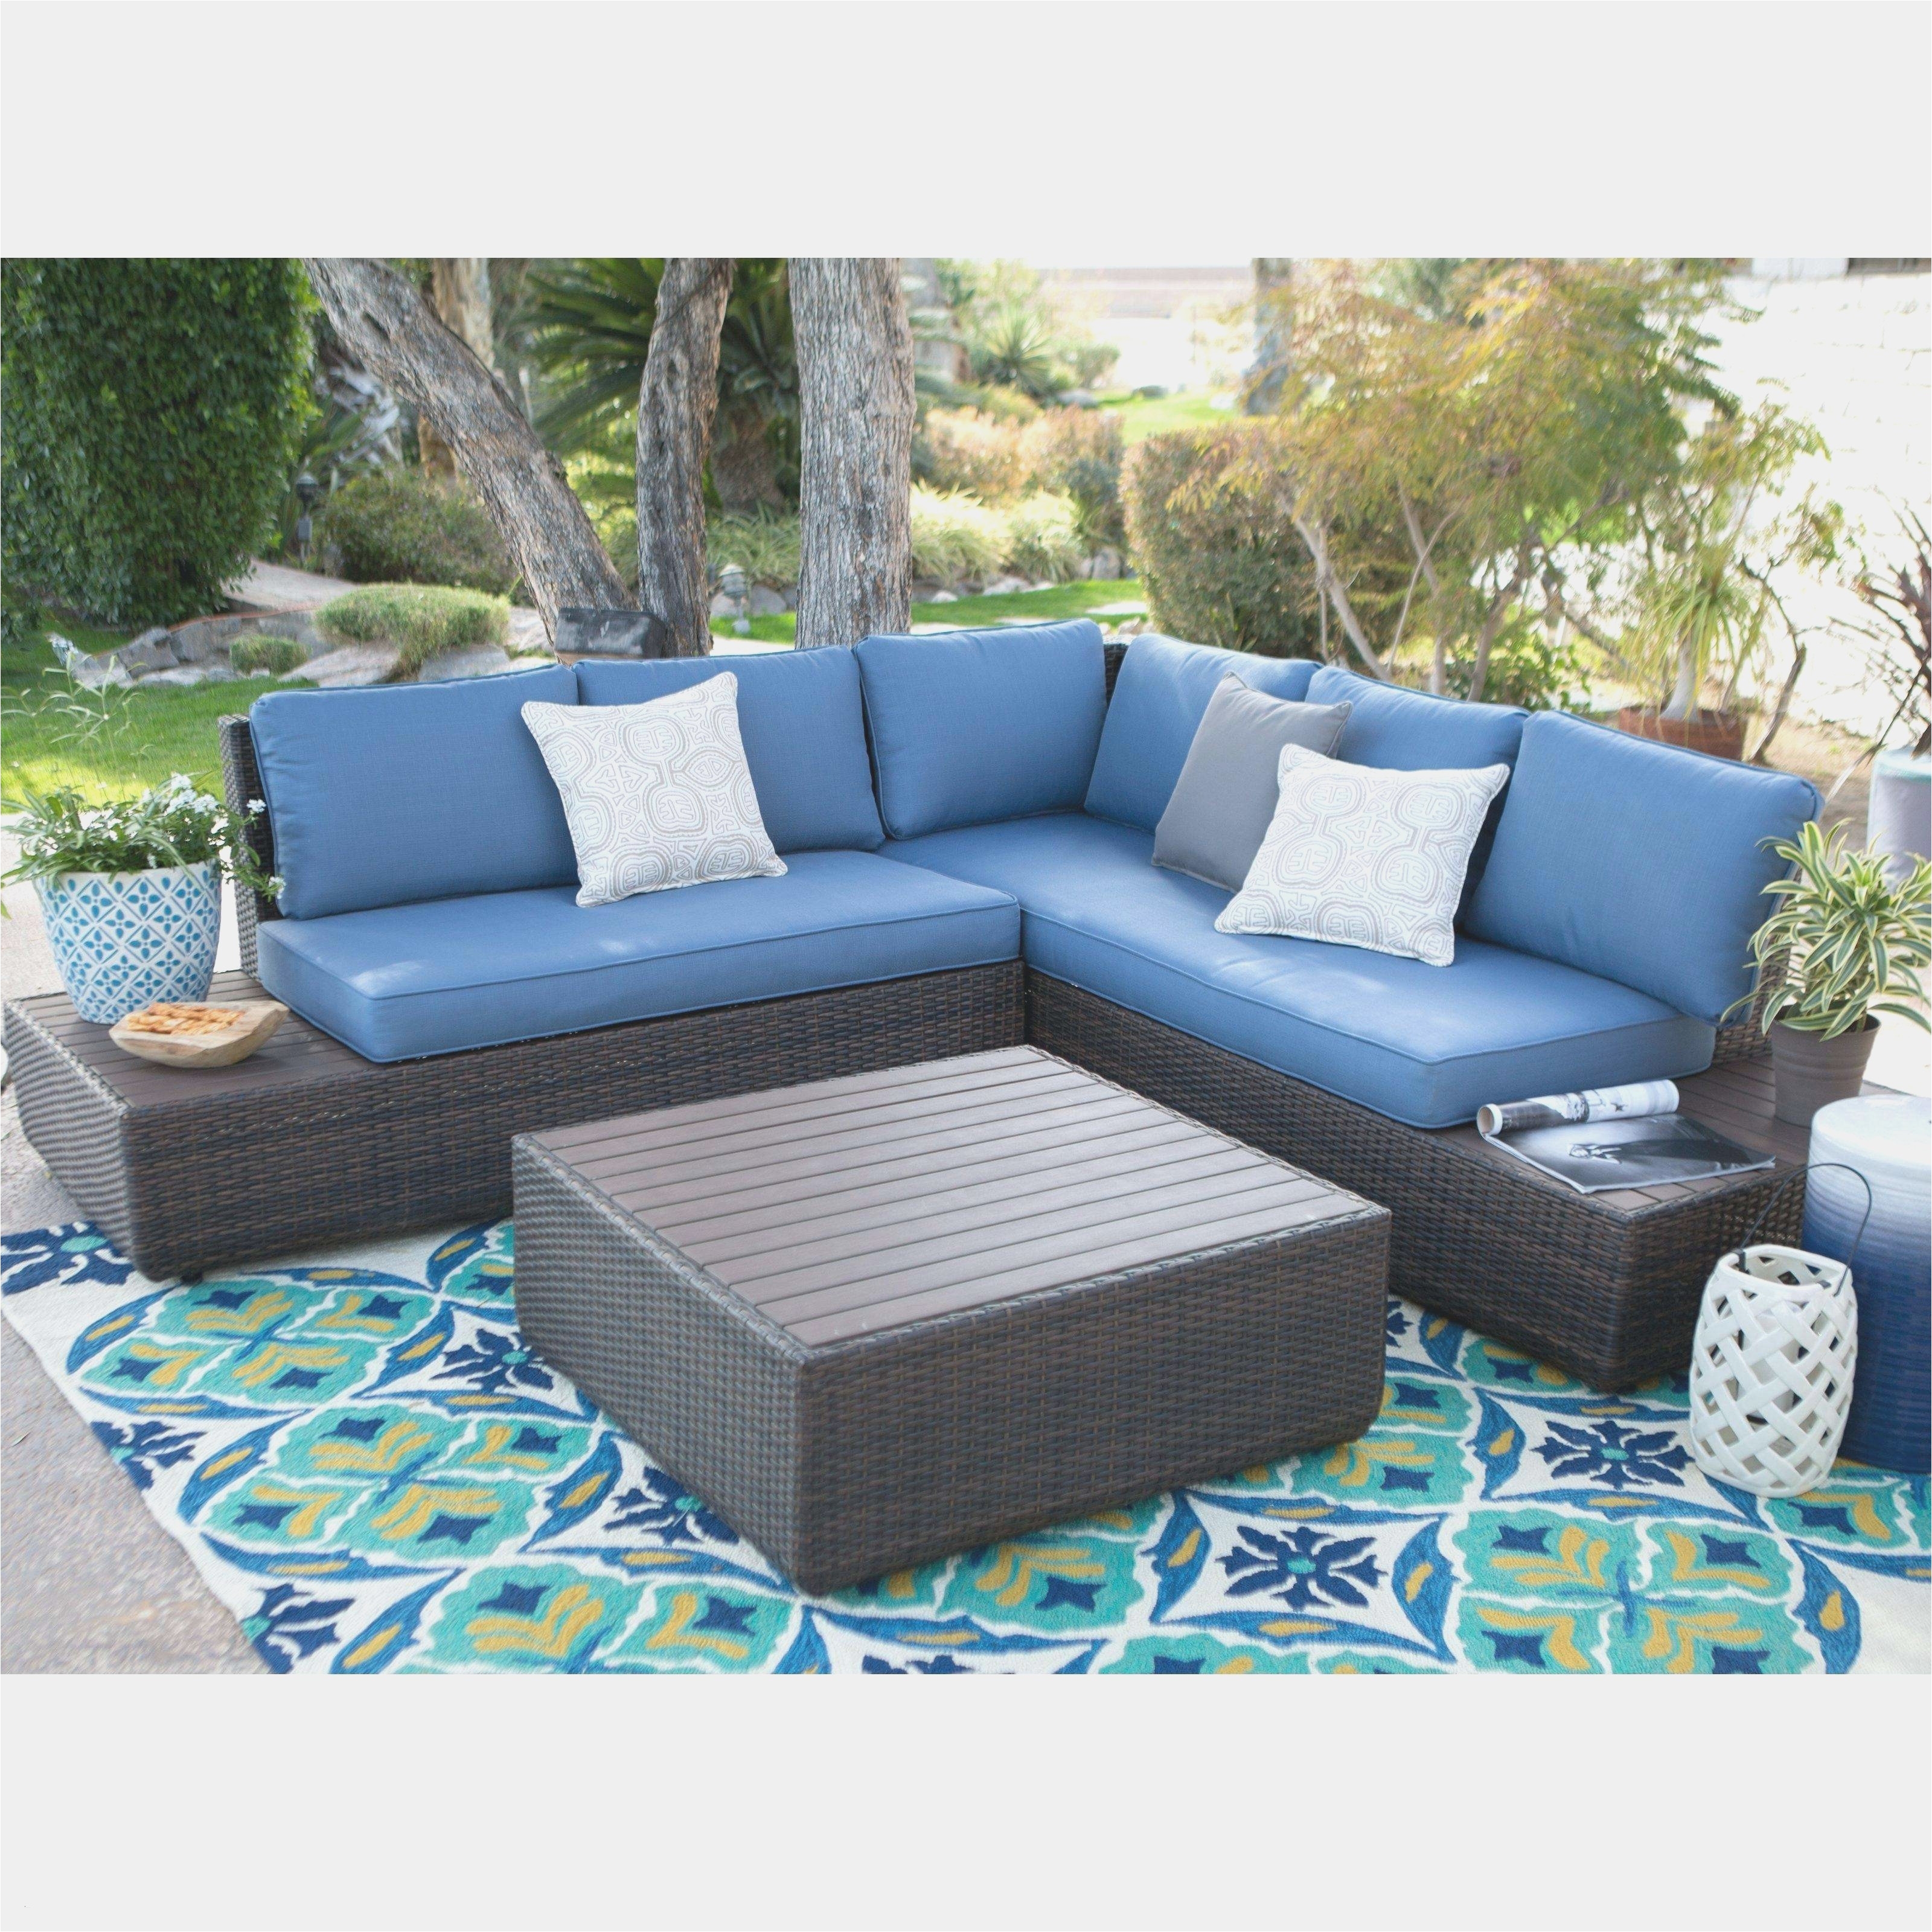 affordable outdoor furniture luxury cheap outdoor furniture for sale lovely outdoor sofa 0d patio chairs